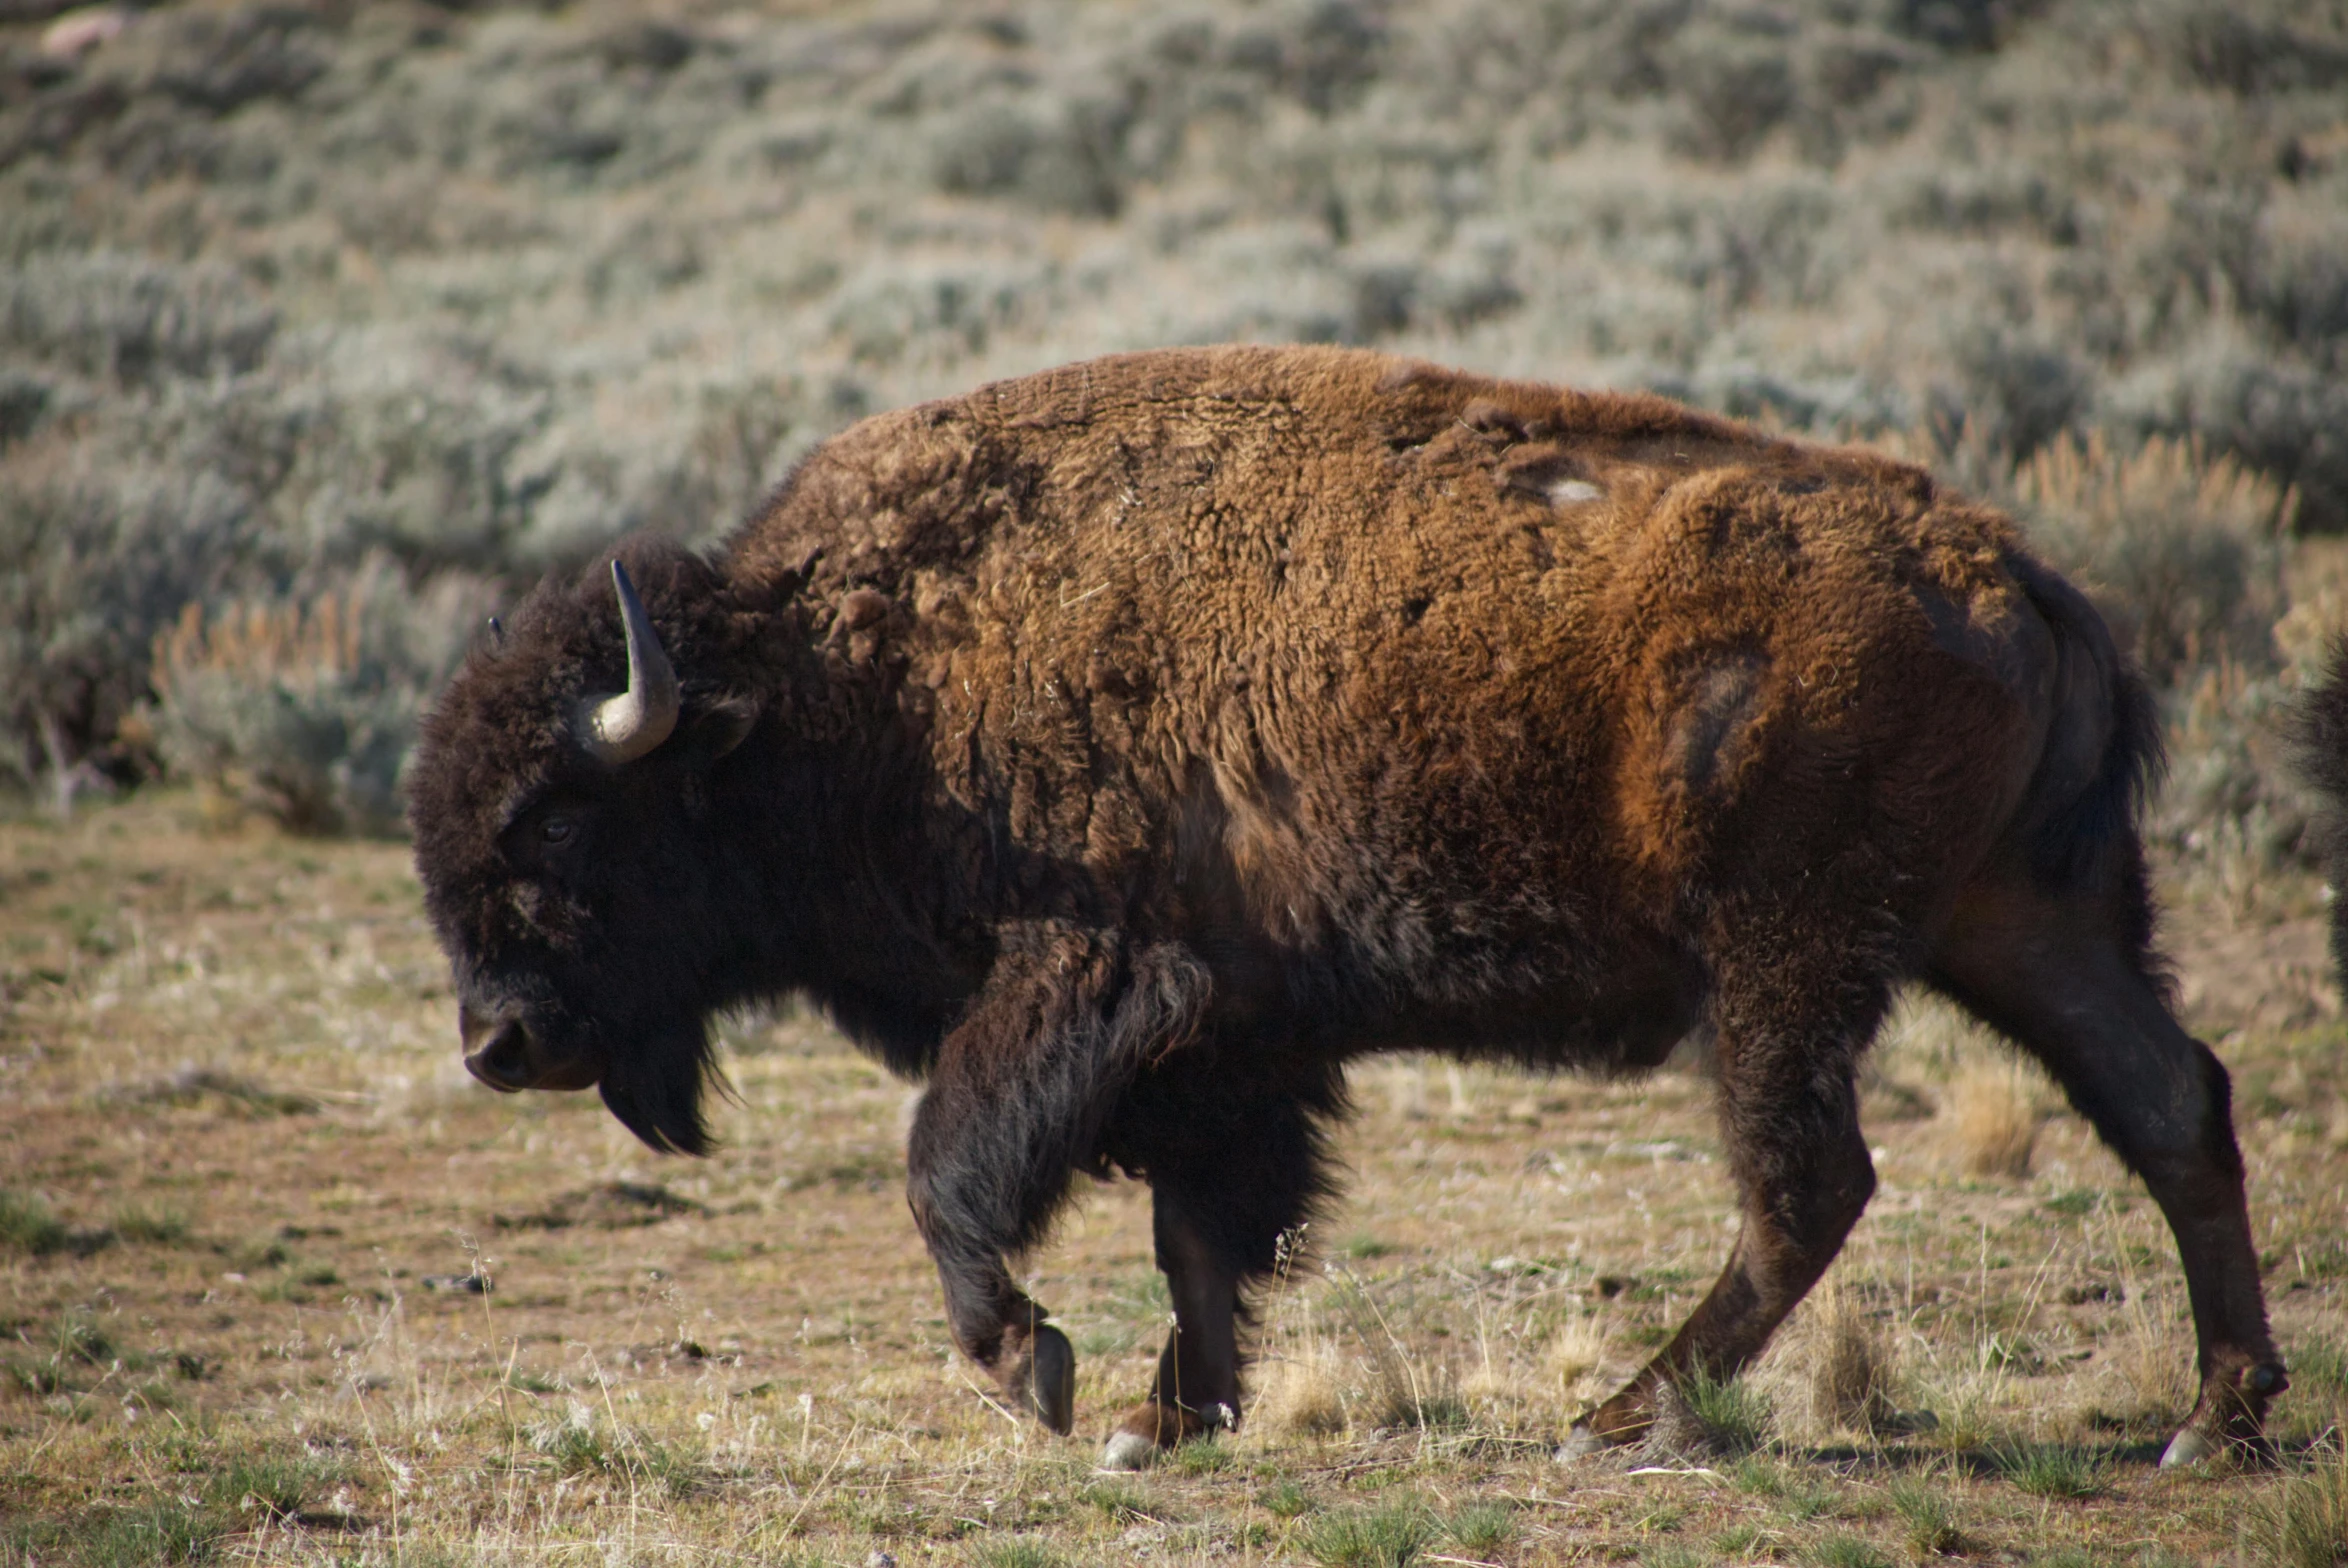 a large brown bison standing in the middle of a grassy field